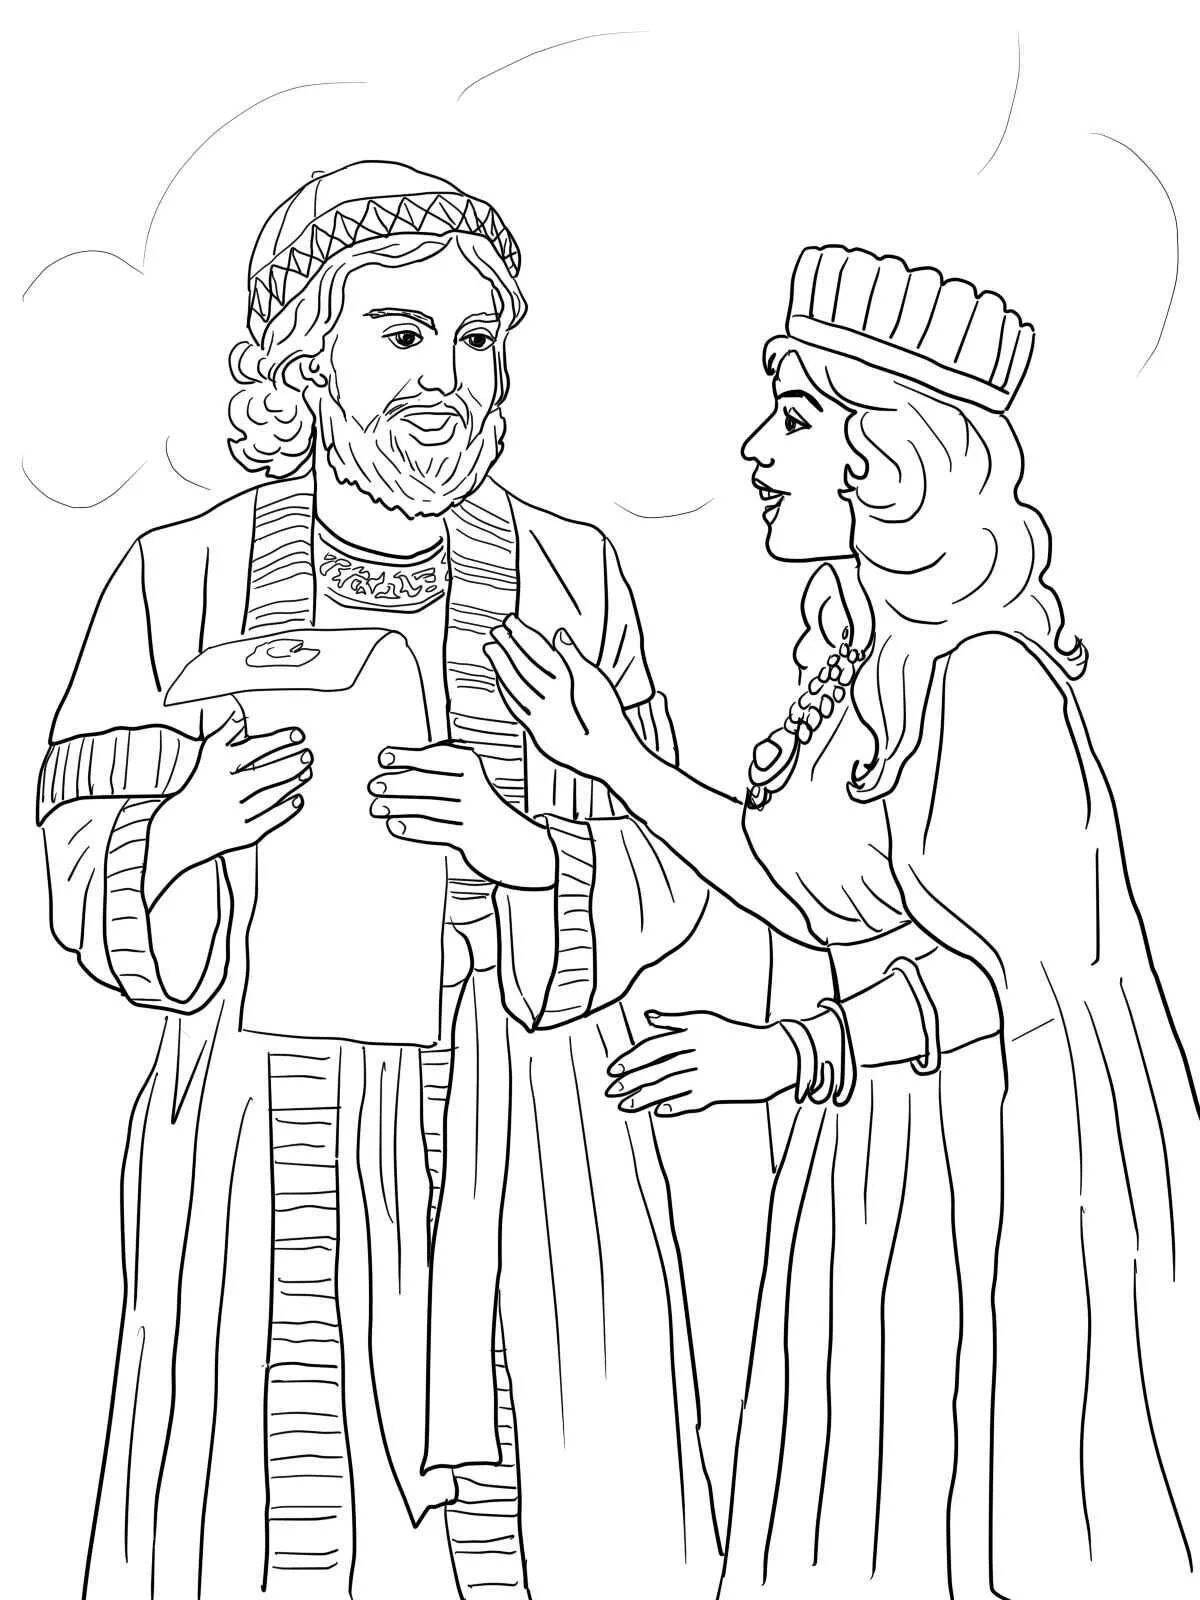 Shiny king and queen coloring book